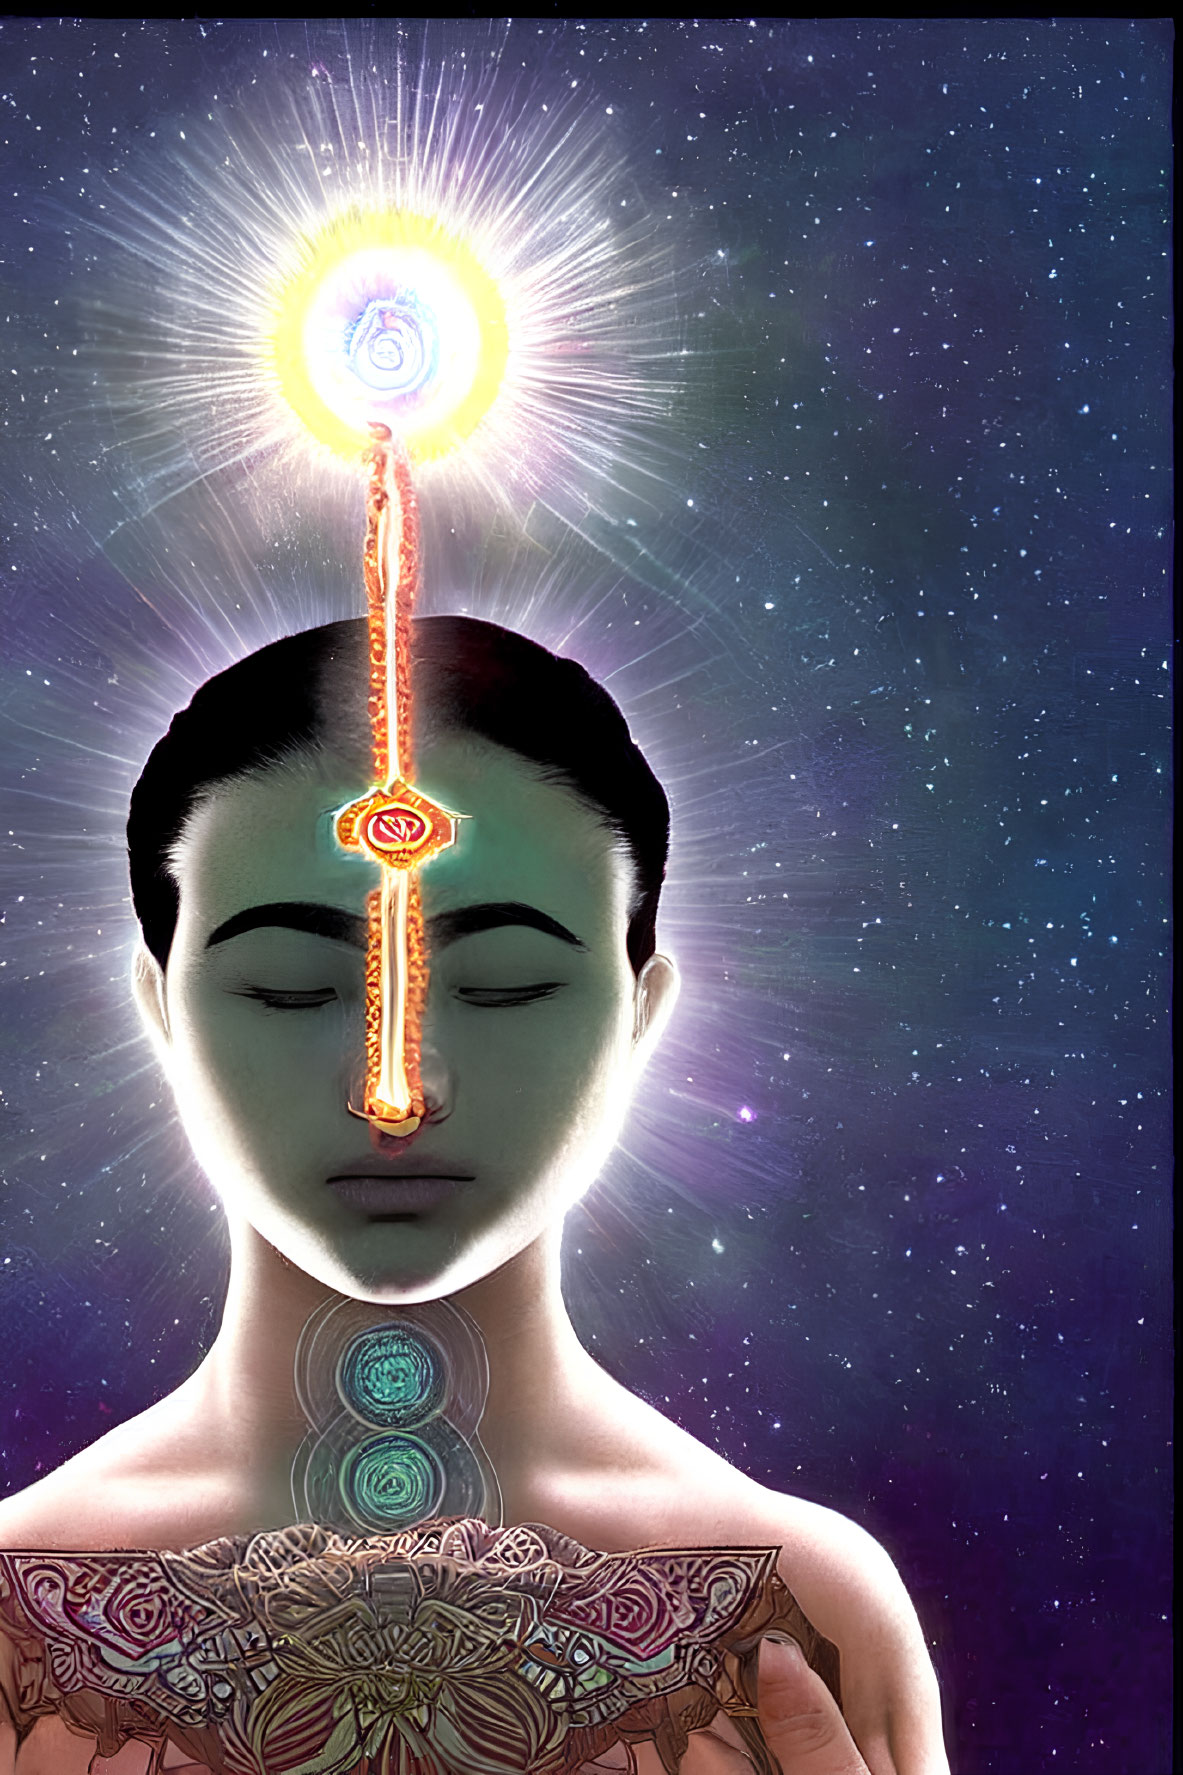 Meditating person with aligned glowing chakras under starry sky